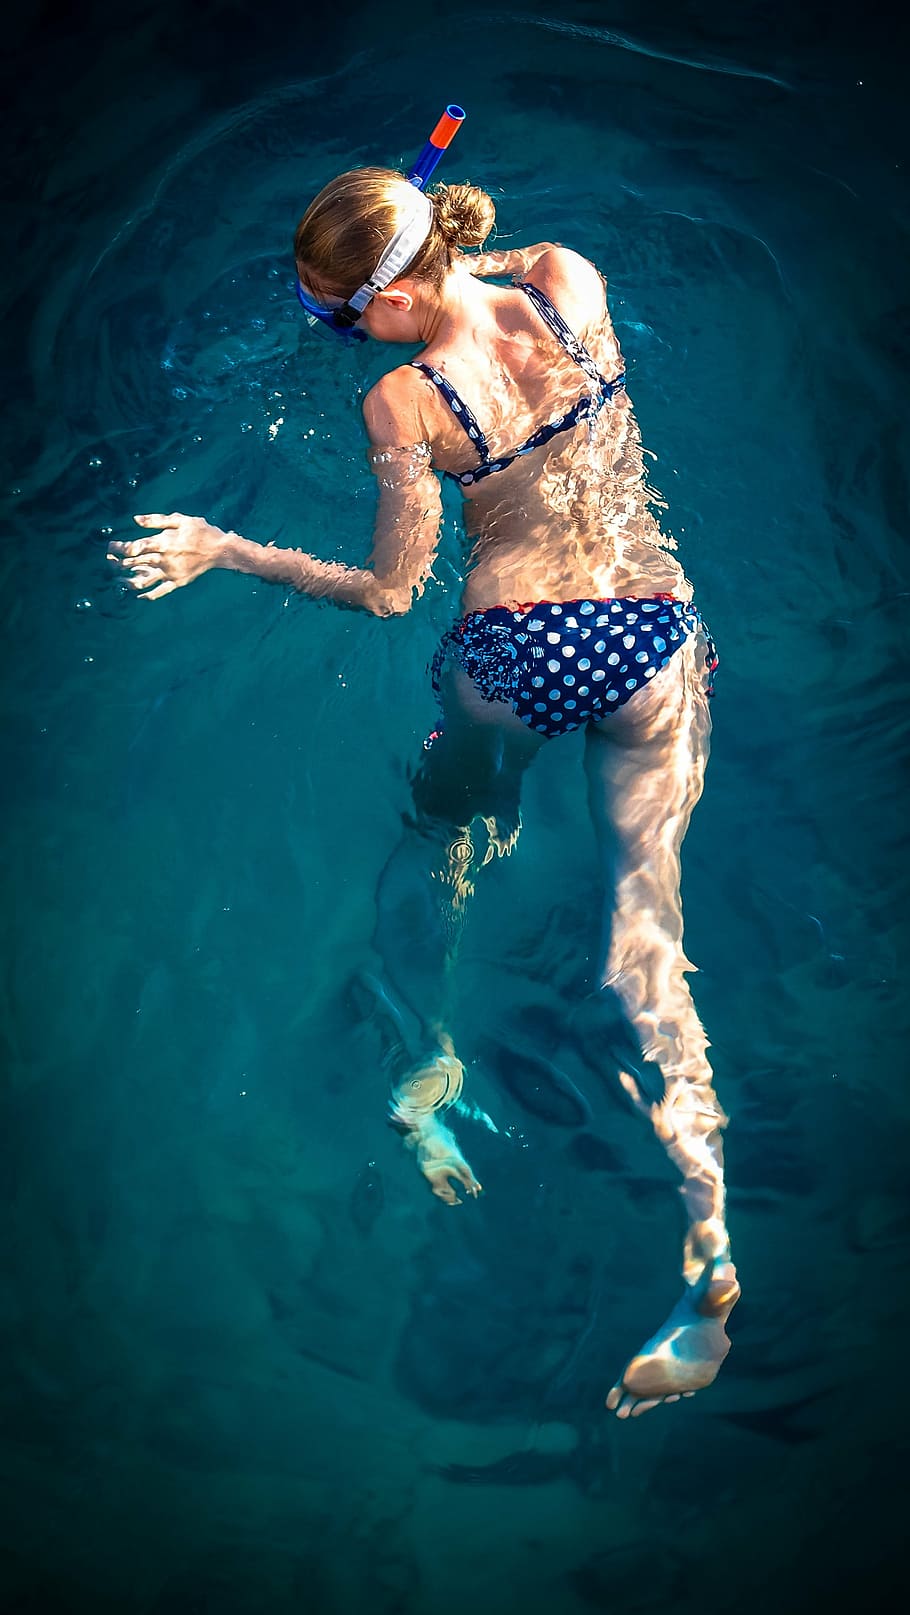 snorkeling, diving, girl, water, holiday, swimming pool, sea, water sports, hobby, swimming